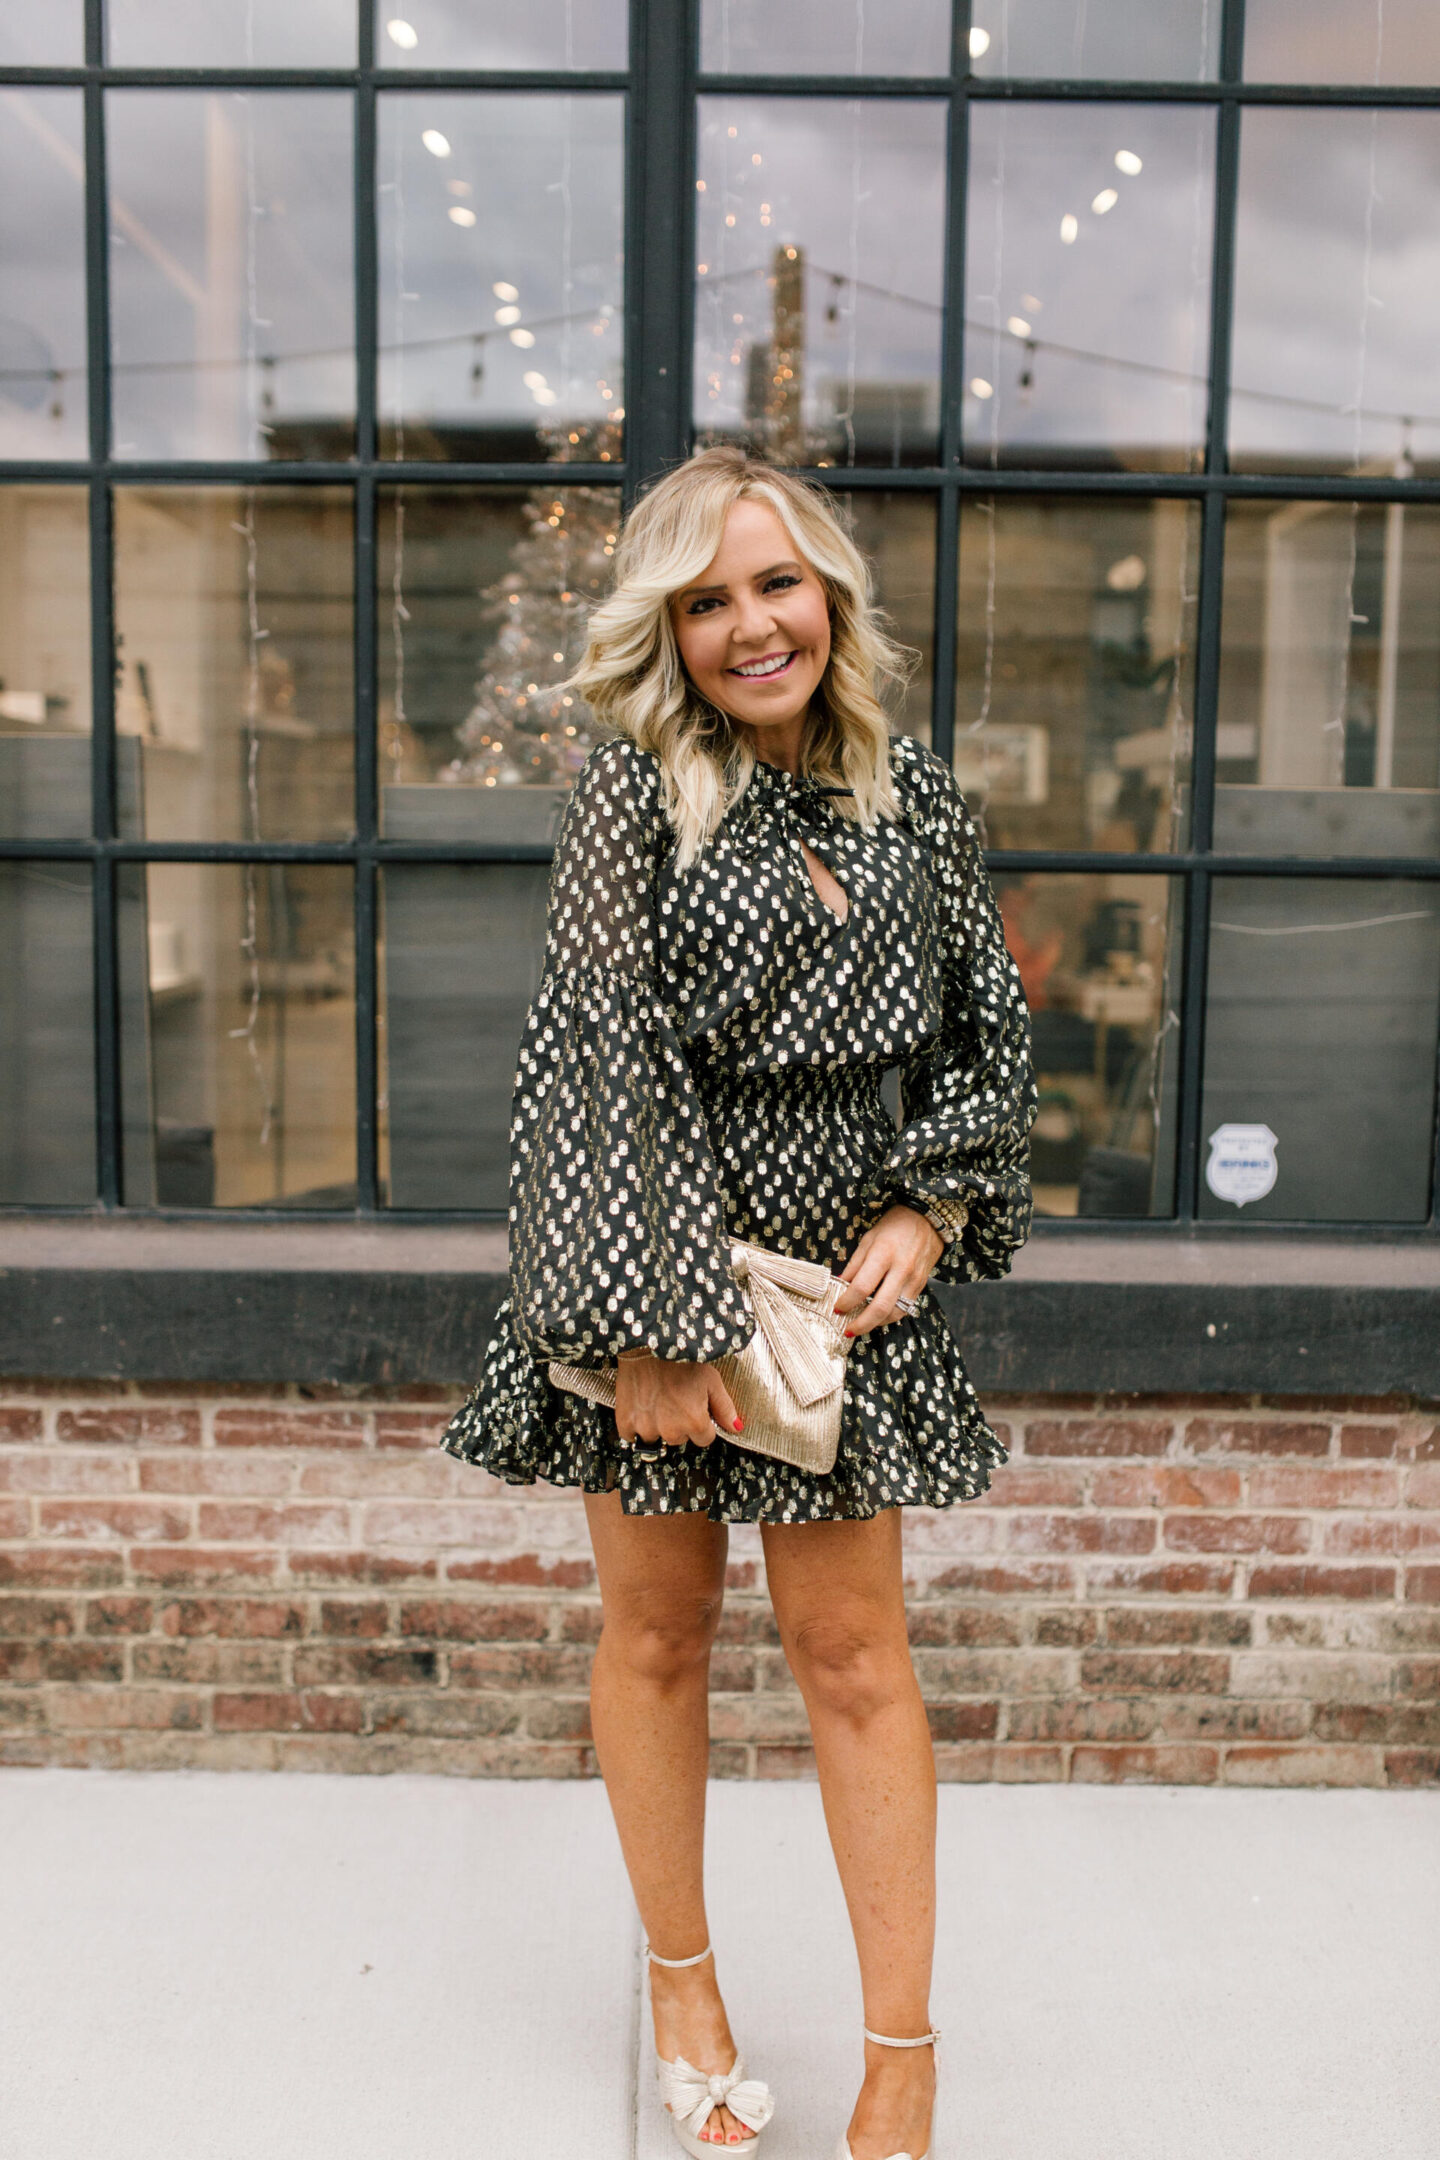 sparkle + shine new years eve outfit ideas featured by top US mom fashion blogger, Hello Happiness.